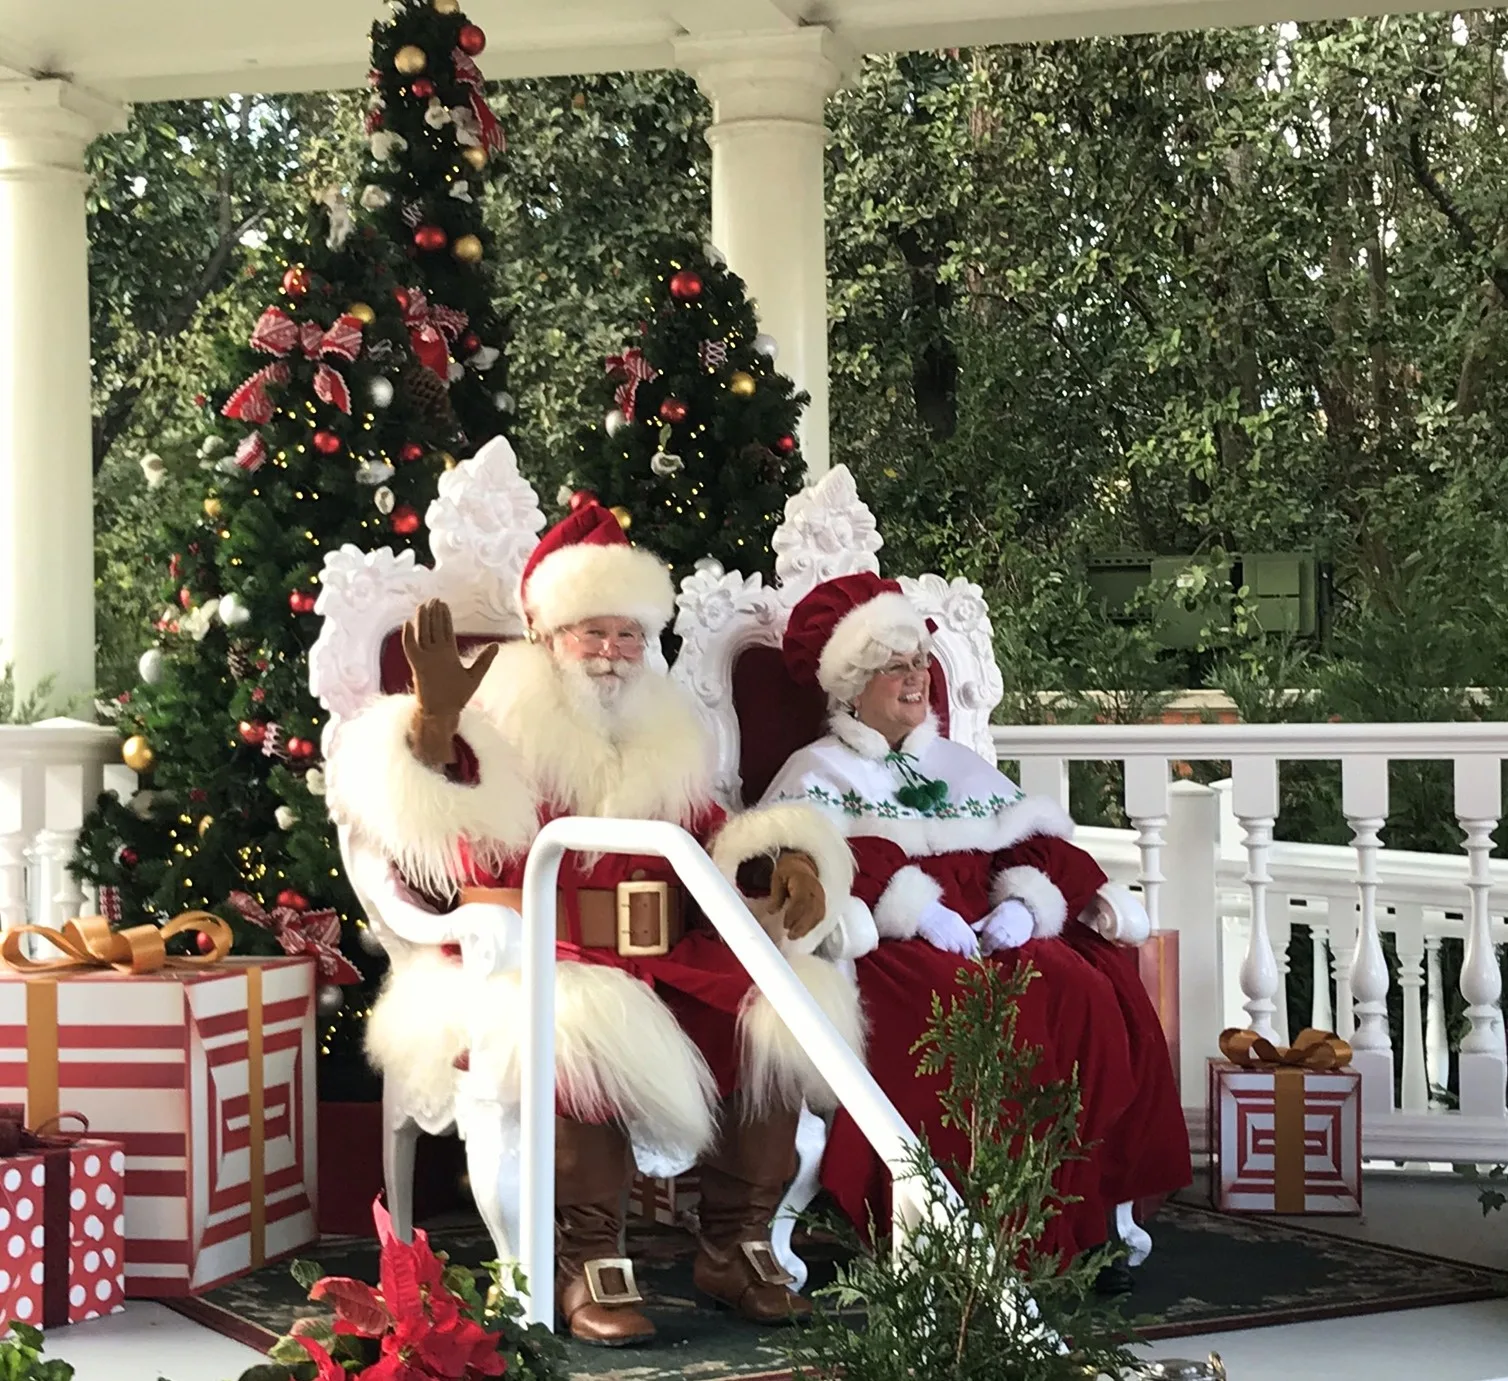 meet and greet with santa and mrs. claus